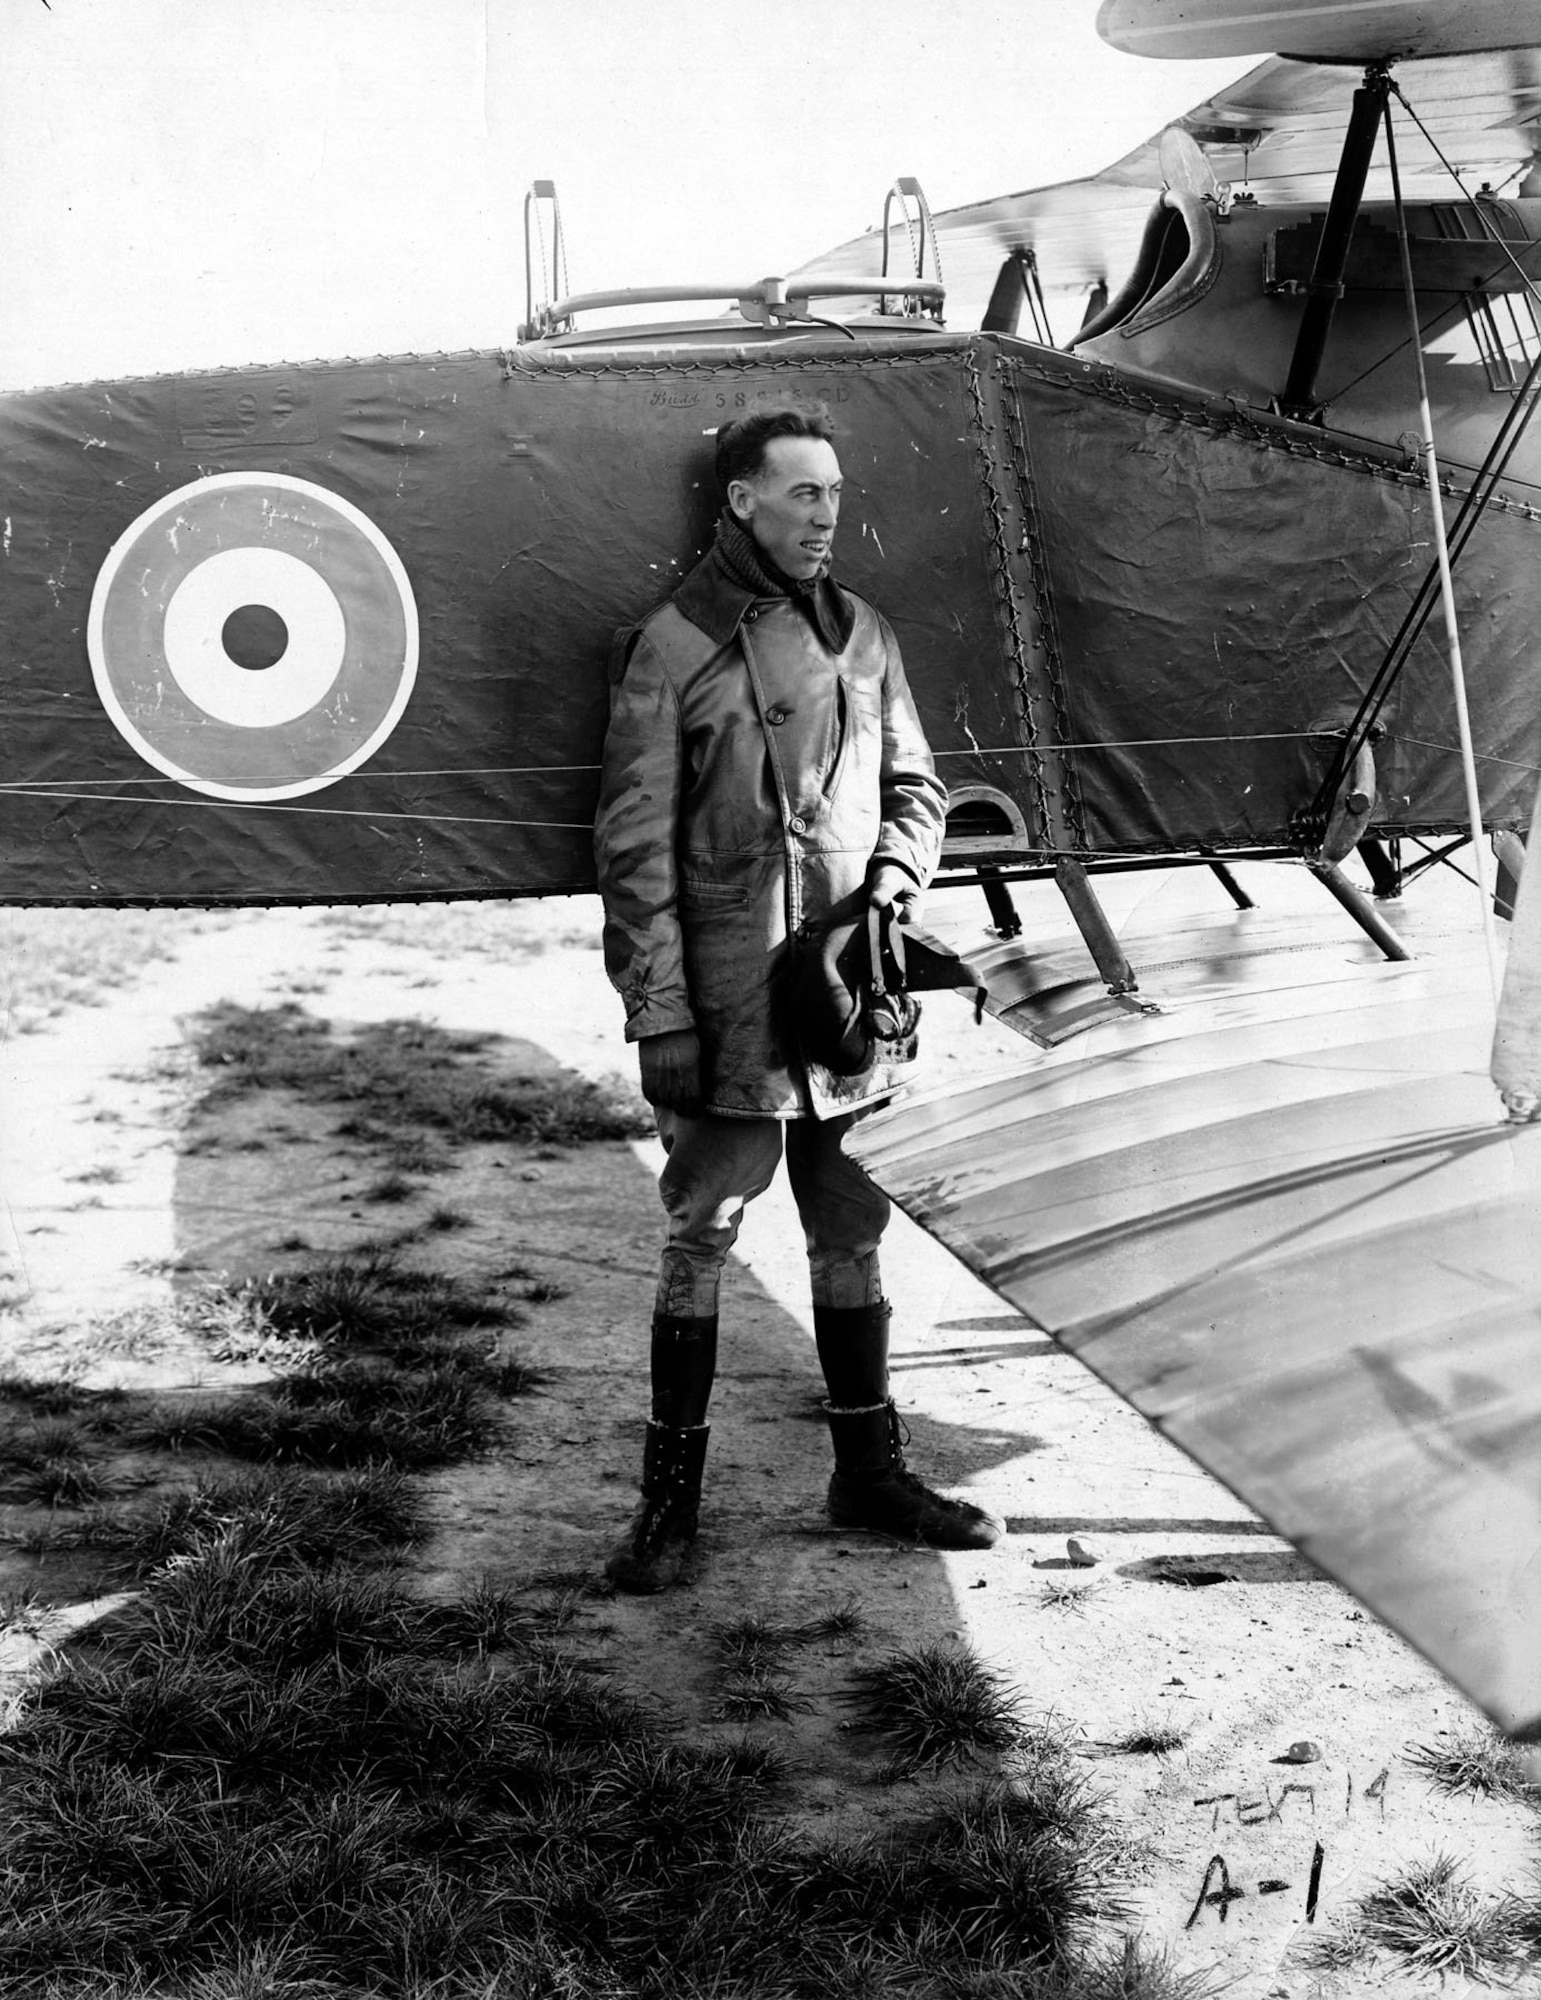 Capt. Rudolph Schroeder stands by the fuselage of a Bristol fighter, the type in which he set a world altitude record in 1918. (U.S. Air Force photo)